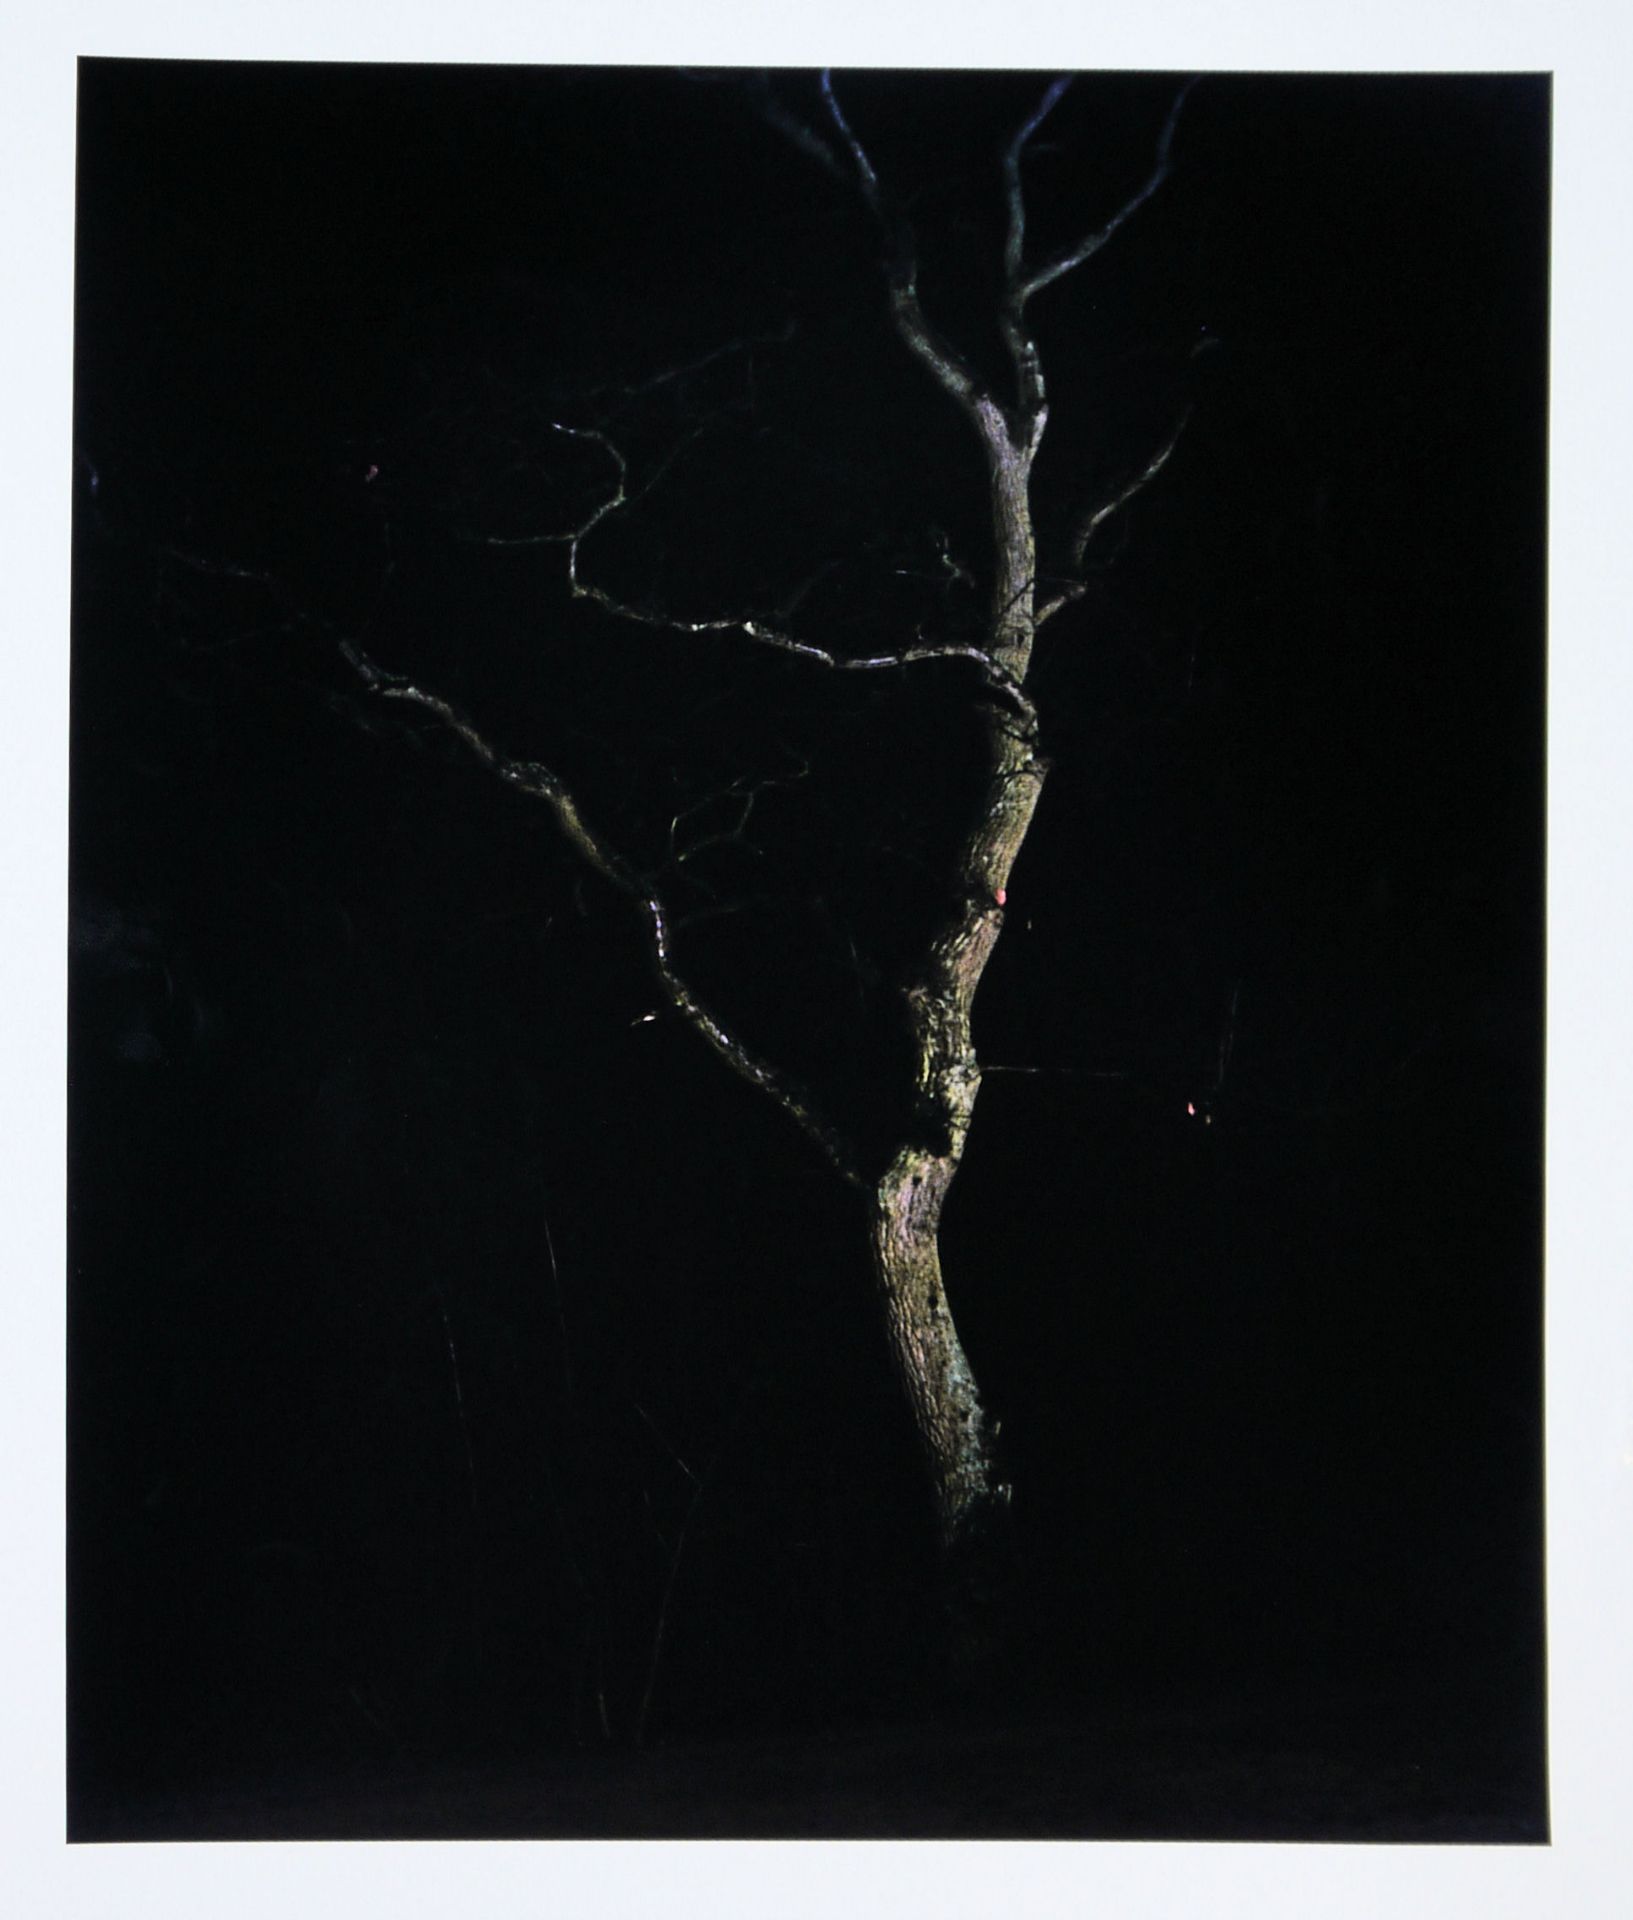 Linn Schröder, "To The Moon", 6 signed C-prints from 2008 - Image 6 of 7